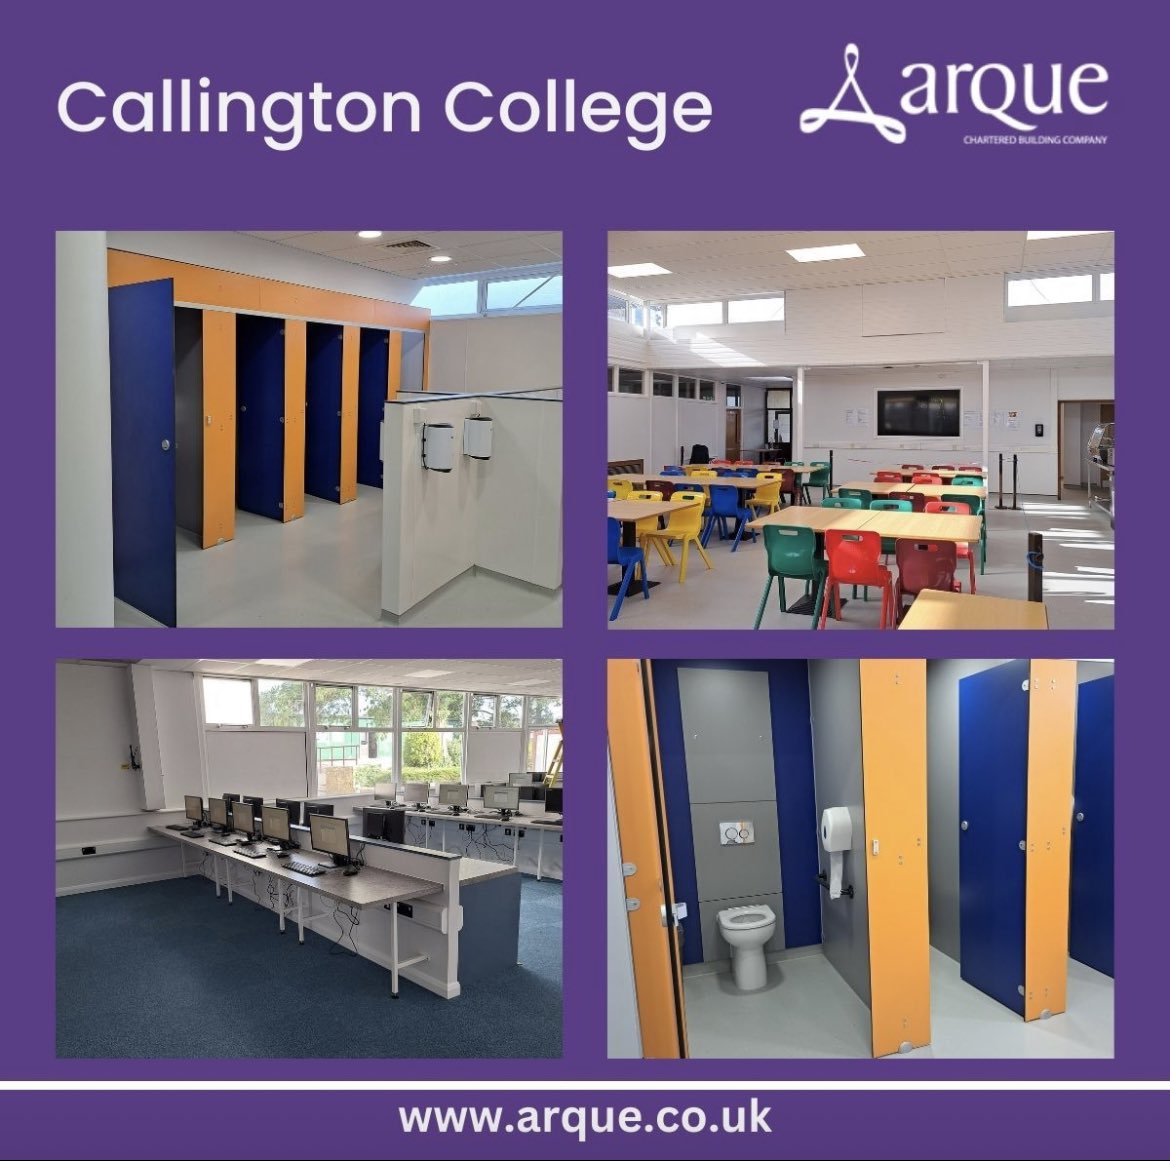 Its been a busy summer period for our teams on site as we completed a number of education projects across the South West.

One of the projects we have completed was at Callington College for Westcountry Schools Trust.

#education #refurbishment #teamwork #repeatbusiness